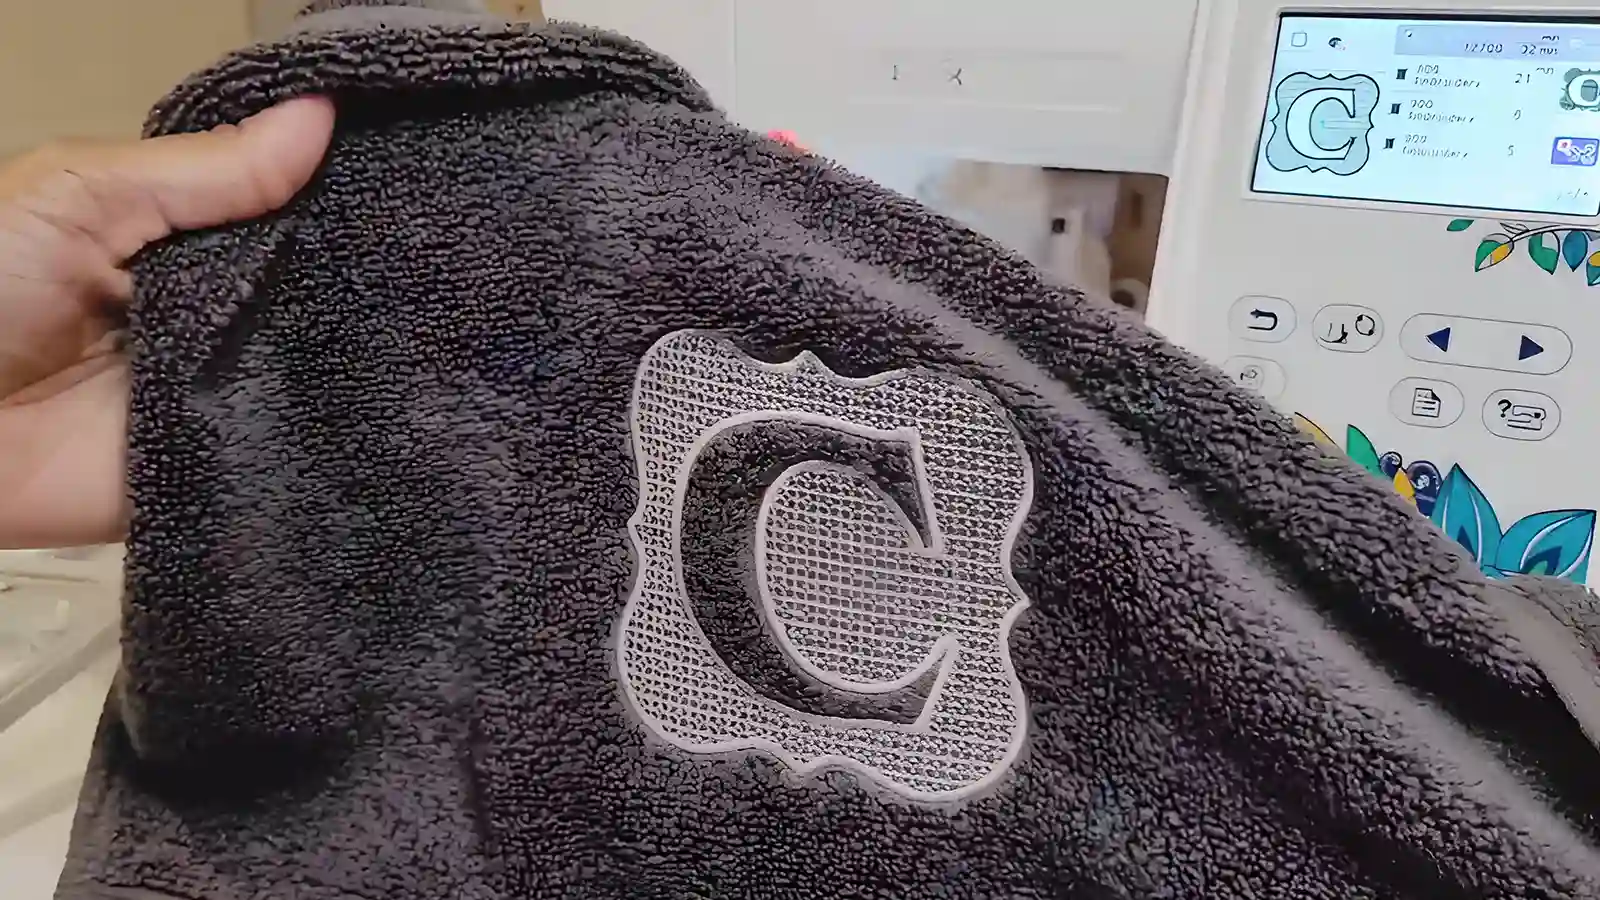 How to Embroider on Towels: a Tutorial for Embroidery on a Towel